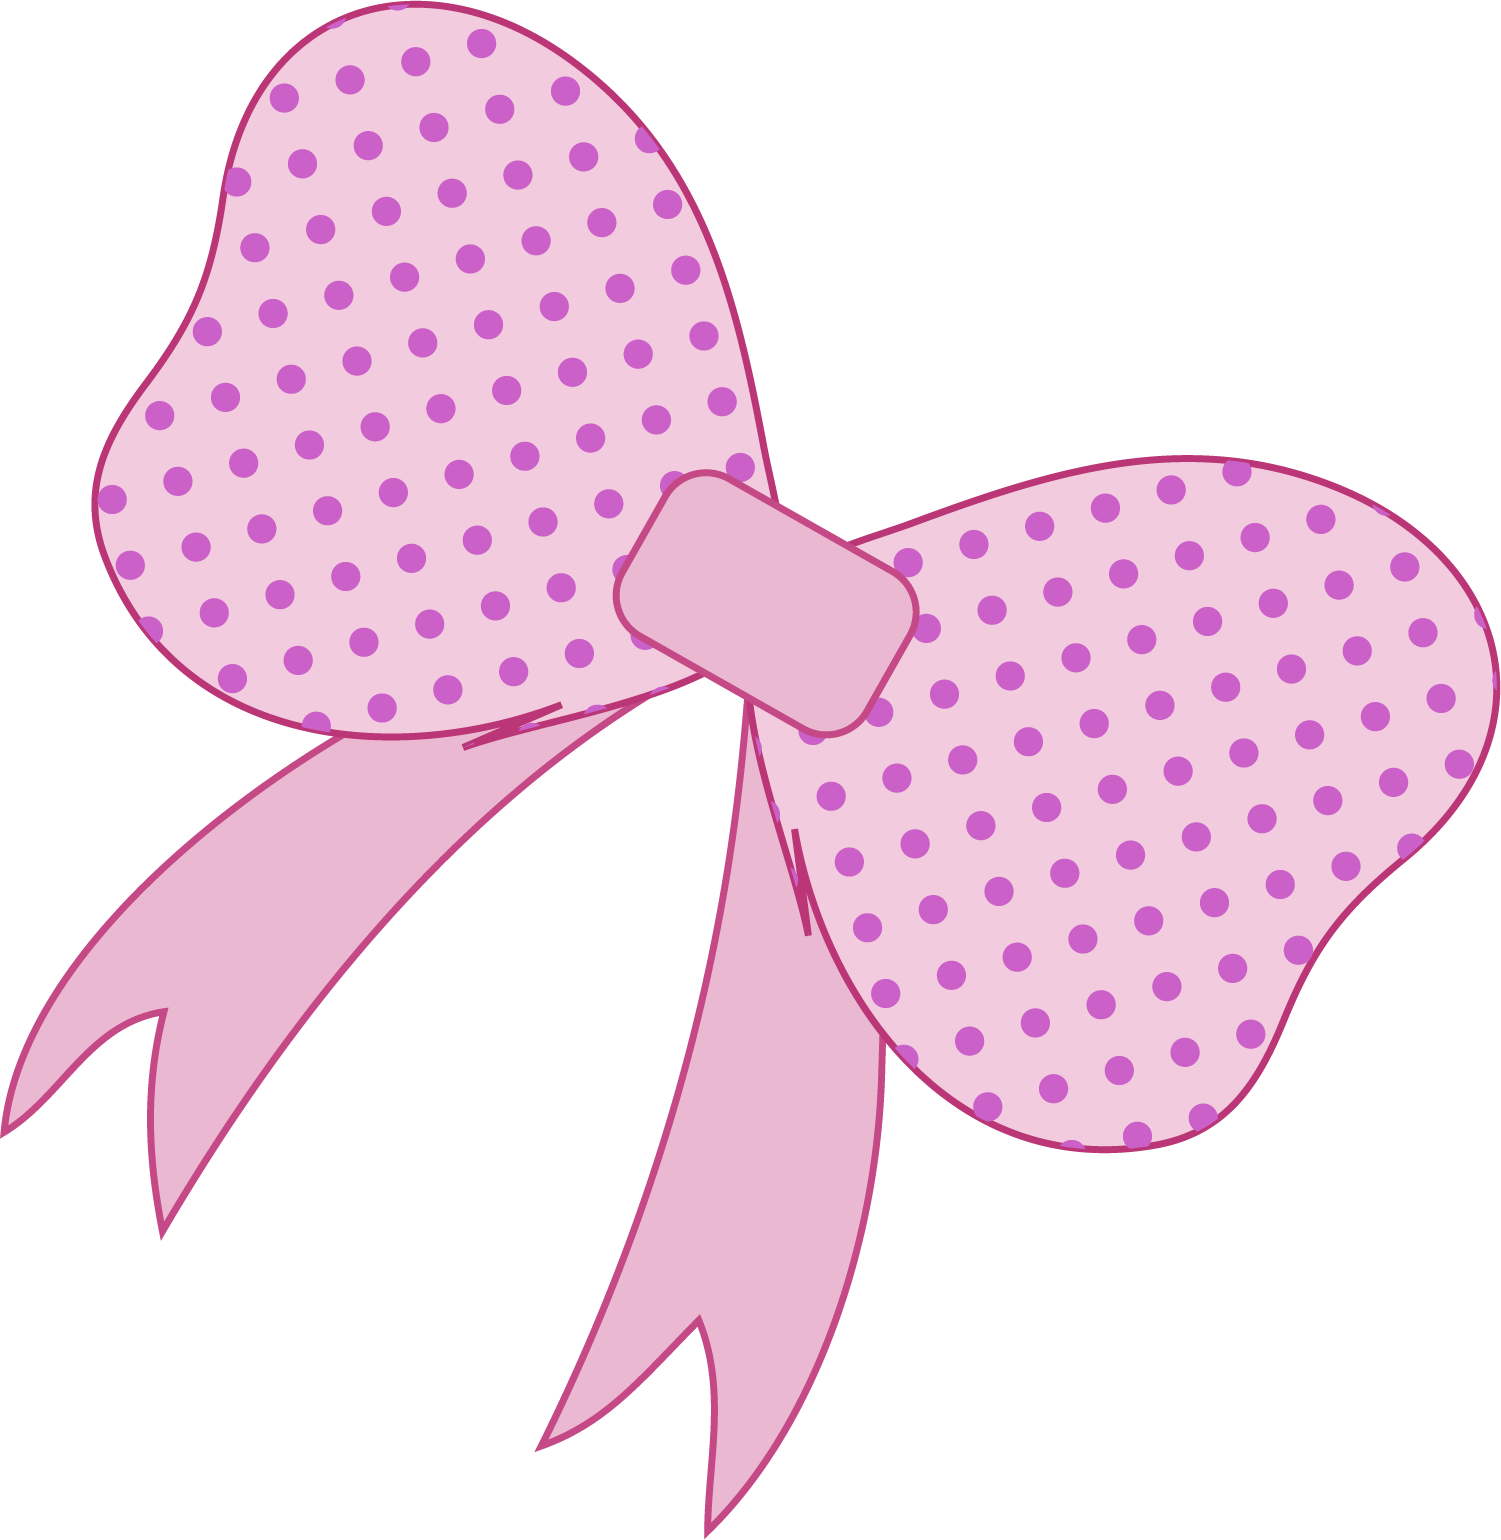 clipart bow light pink